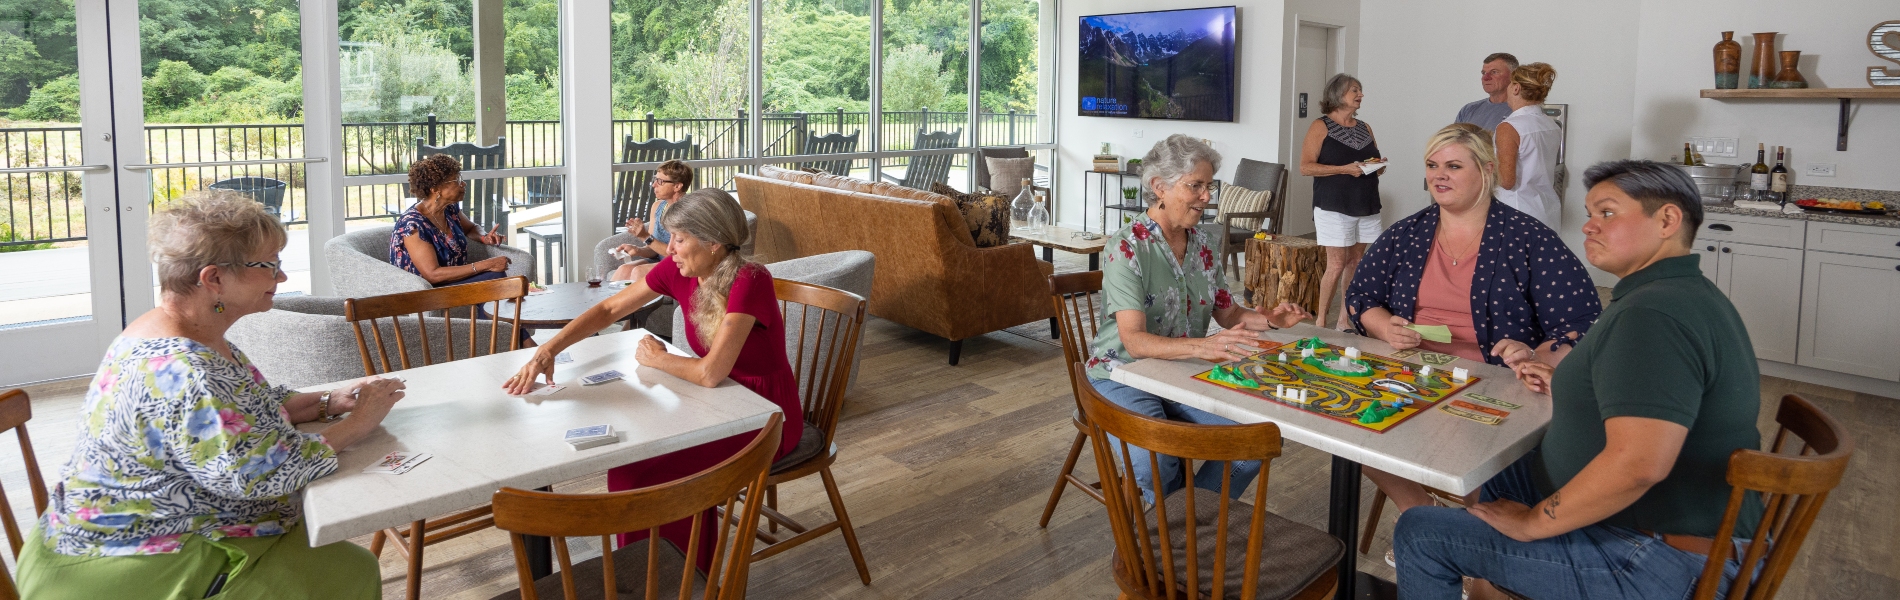 Residents gather in the clubhouse at The Hamlet to play games and enjoy each other's company.